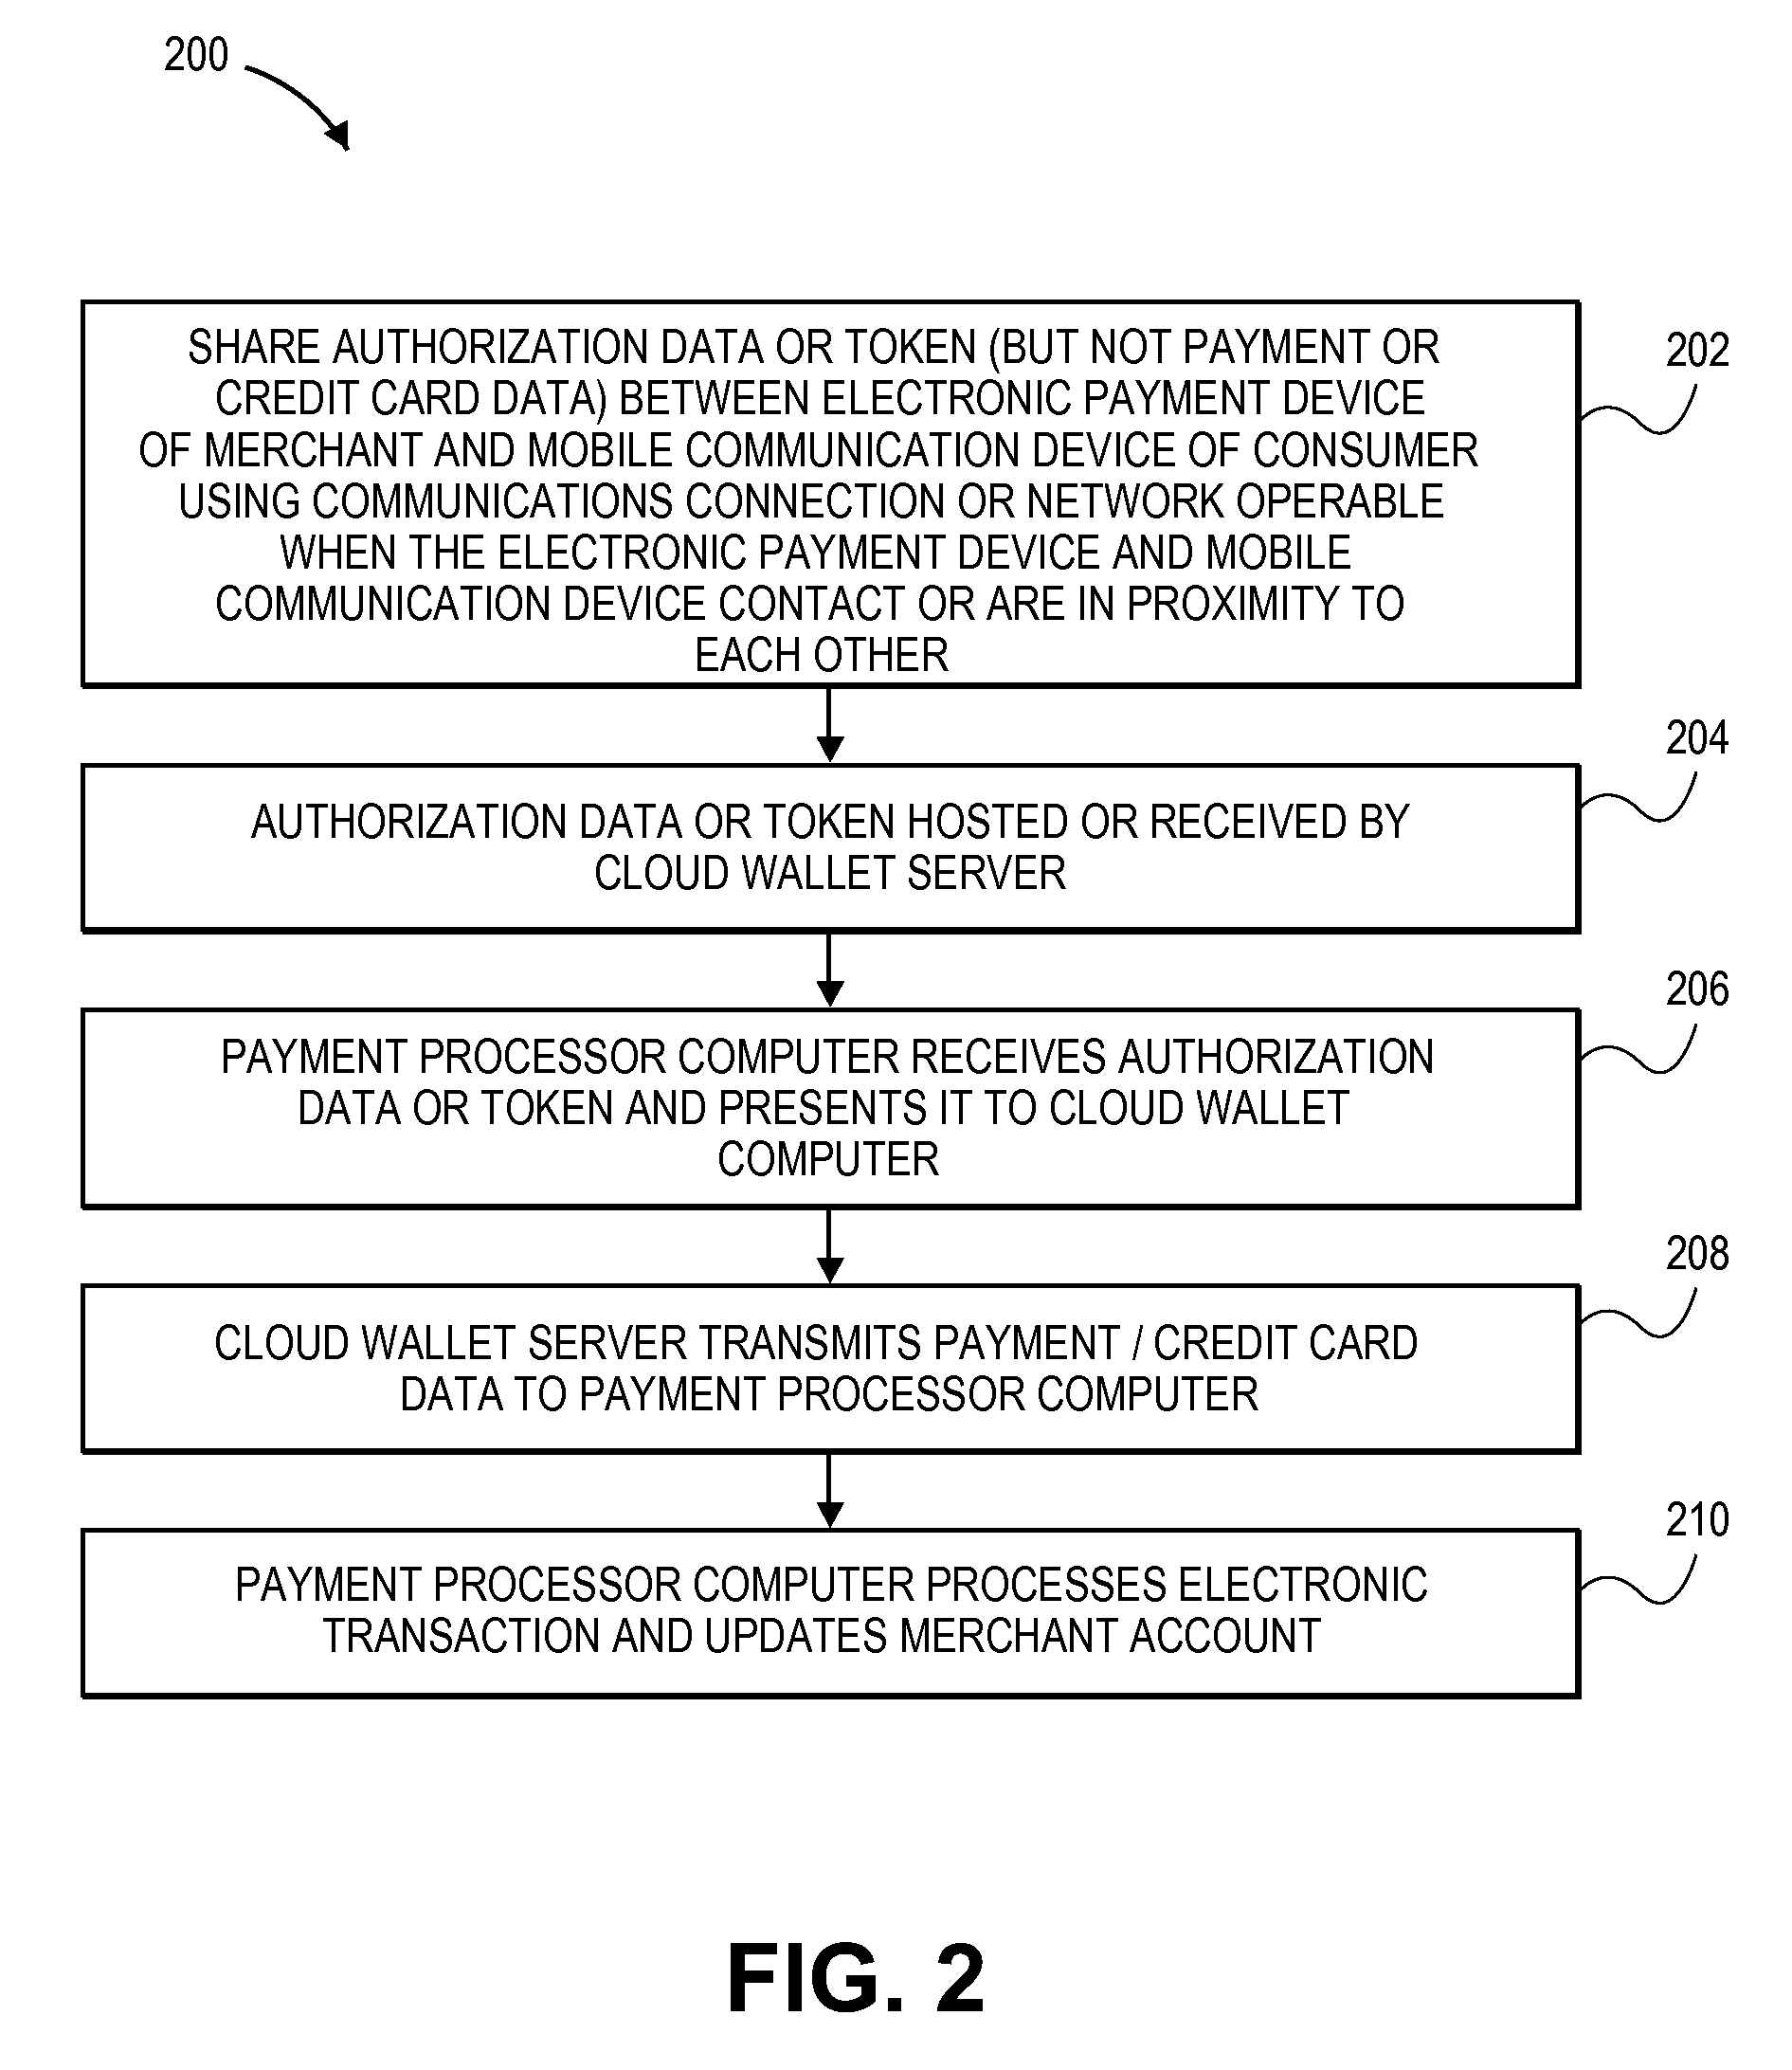 Processing electronic payment involving mobile communication device